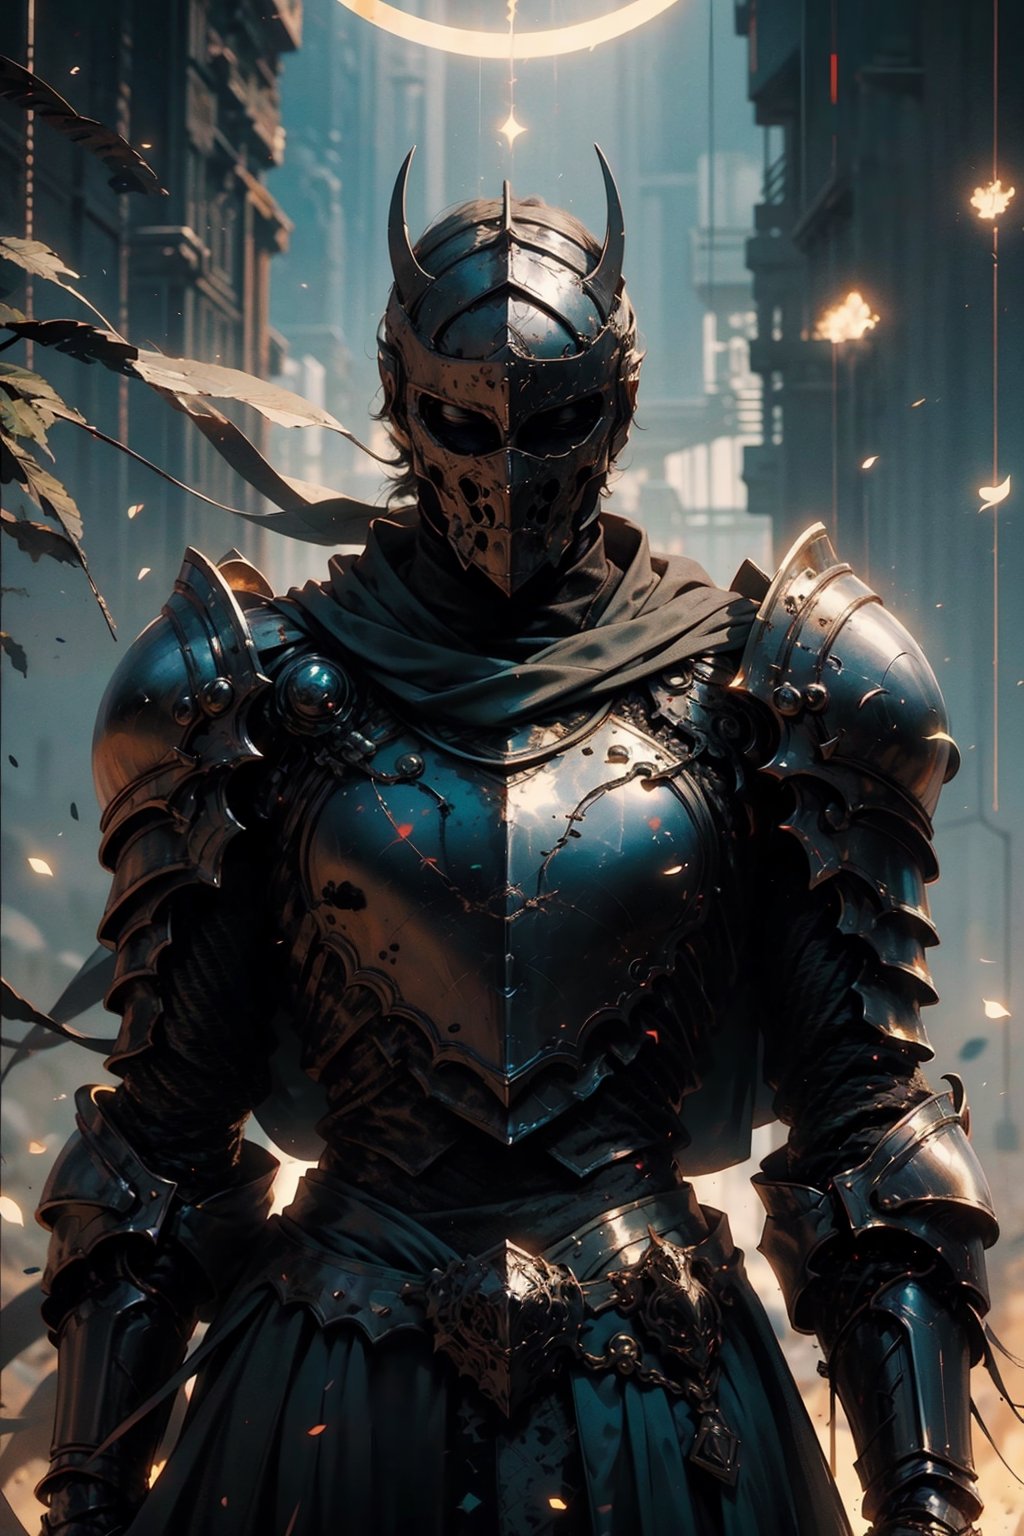 high quality, higher details, masterpiece, beautiful, 4k, 8k, epic ((american shot)),

A furious ((male)) knight in armor covering his entire body and face walking calmly in a warm and sunny climate, well lit with vegetation around him.

exposure blend, medium shot, bokeh, (hdr:1.4), high contrast, (cinematic, teal and orange:0.85), (muted colors, dim colors, soothing tones:1.3), low angle saturation,from below, looking away, Shinkai makoto, 

//Lighting 
atmospheric lighting, volumetric lighting, light_particles, soft light, soft shadow, fine detailed, volumetric top lighting,SharpEyess,fantasy,2B,ddstyle,wrenchsmechs,Soul_of_Cinder,nodf_lora